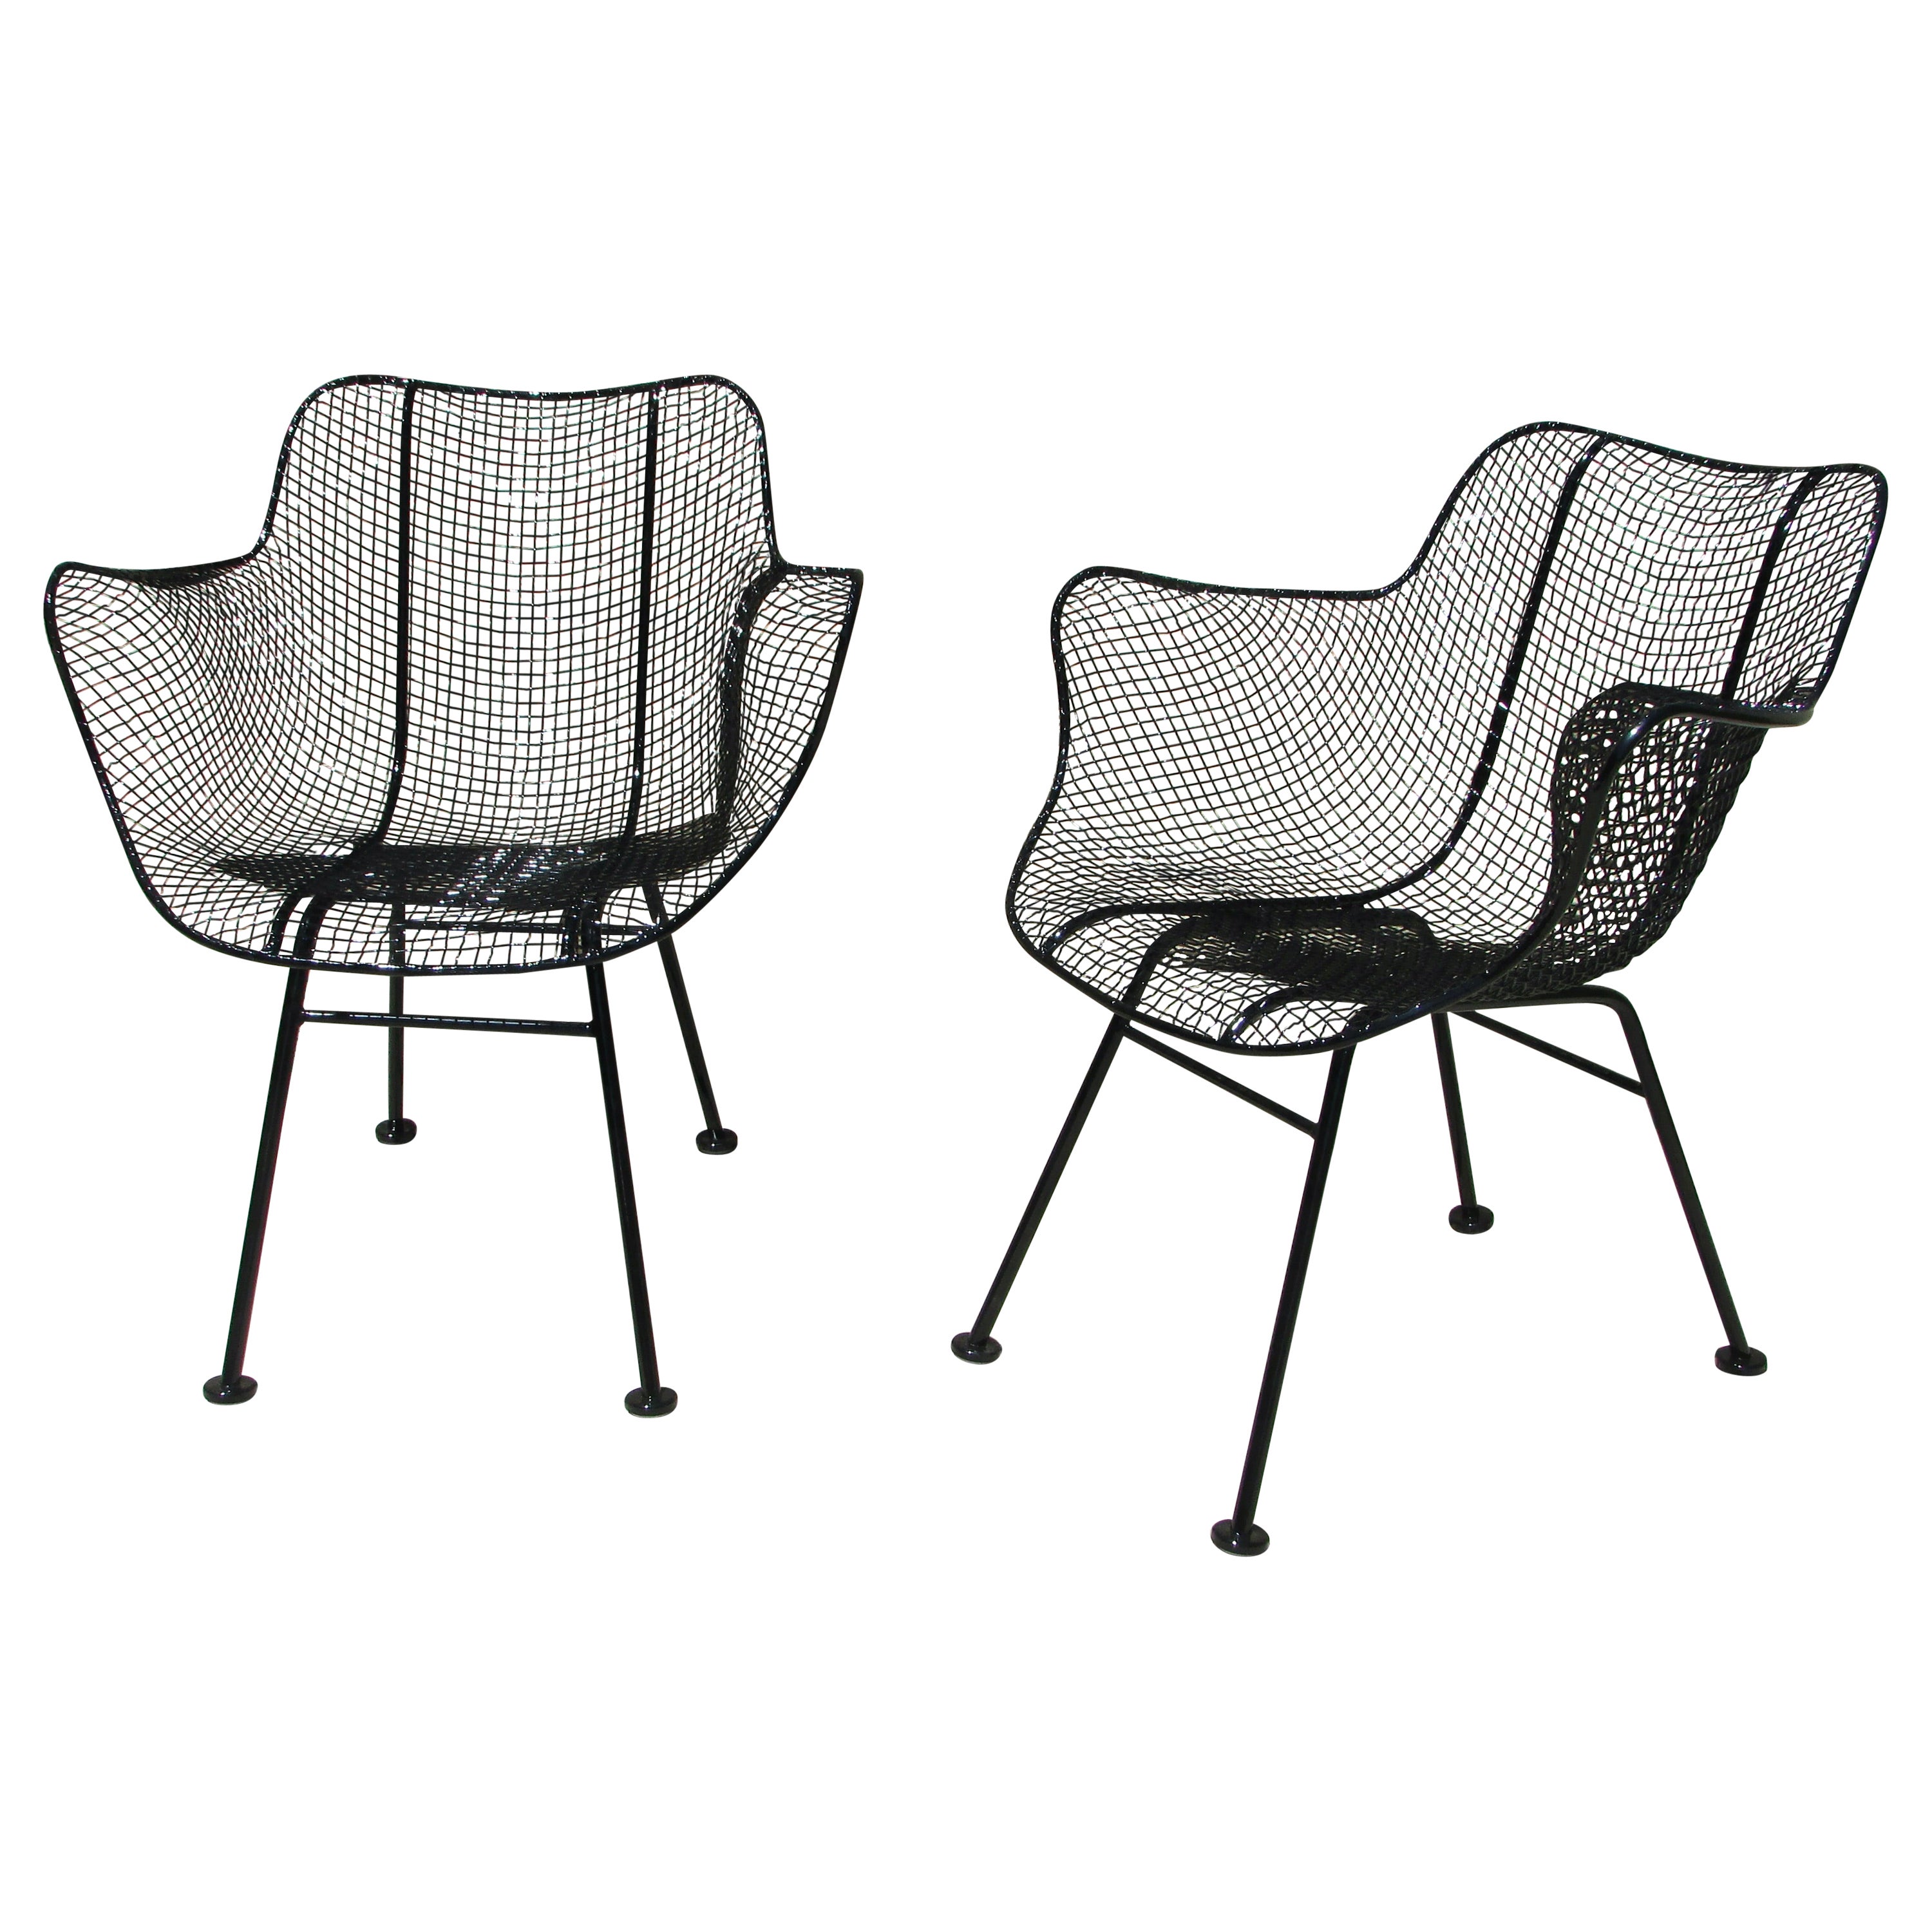 Pair of Gloss Black Woodard Wrought Iron Frame with Steel Mesh Armchairs